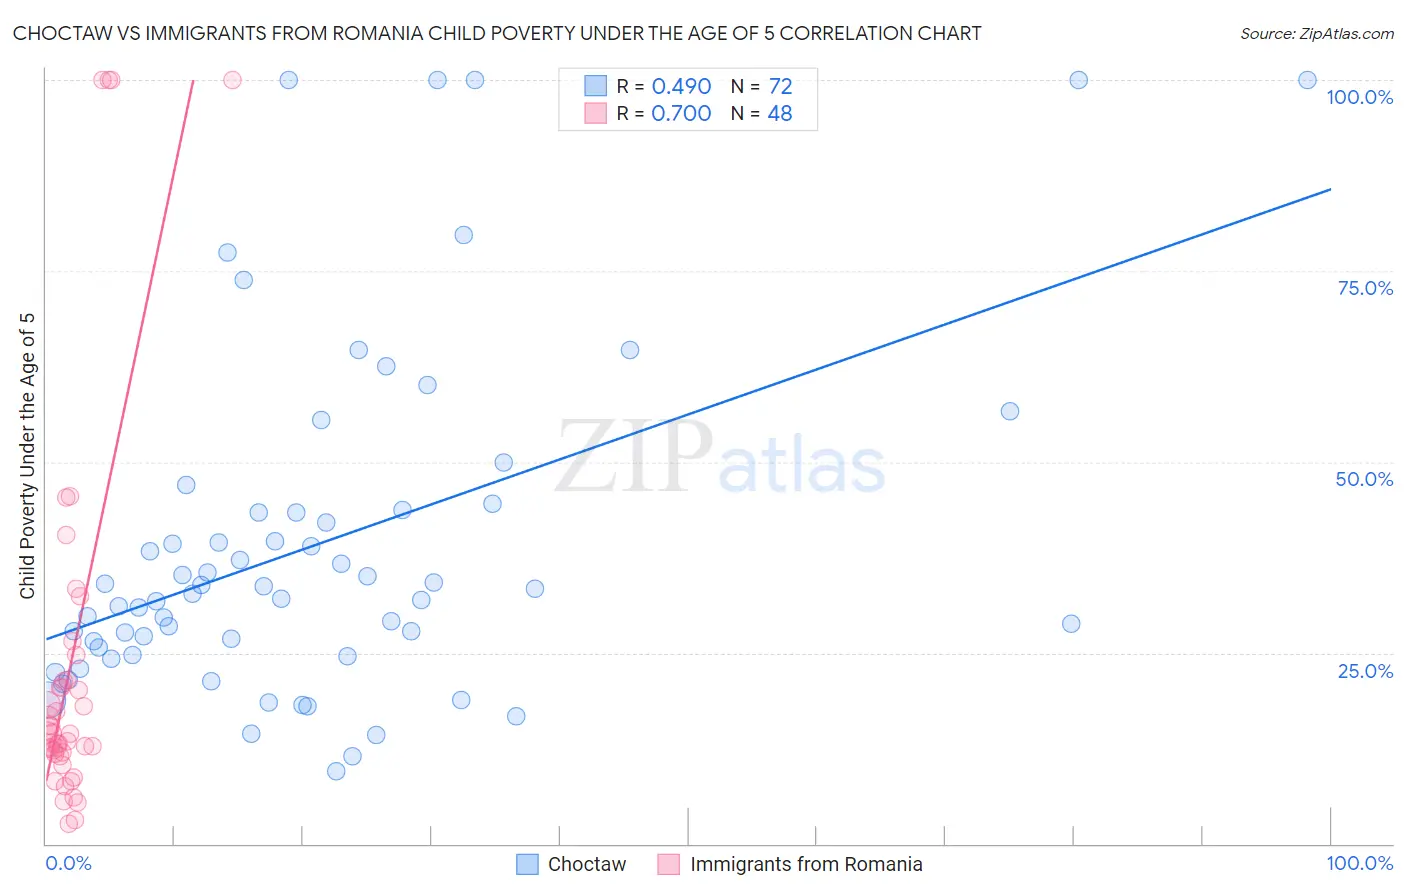 Choctaw vs Immigrants from Romania Child Poverty Under the Age of 5